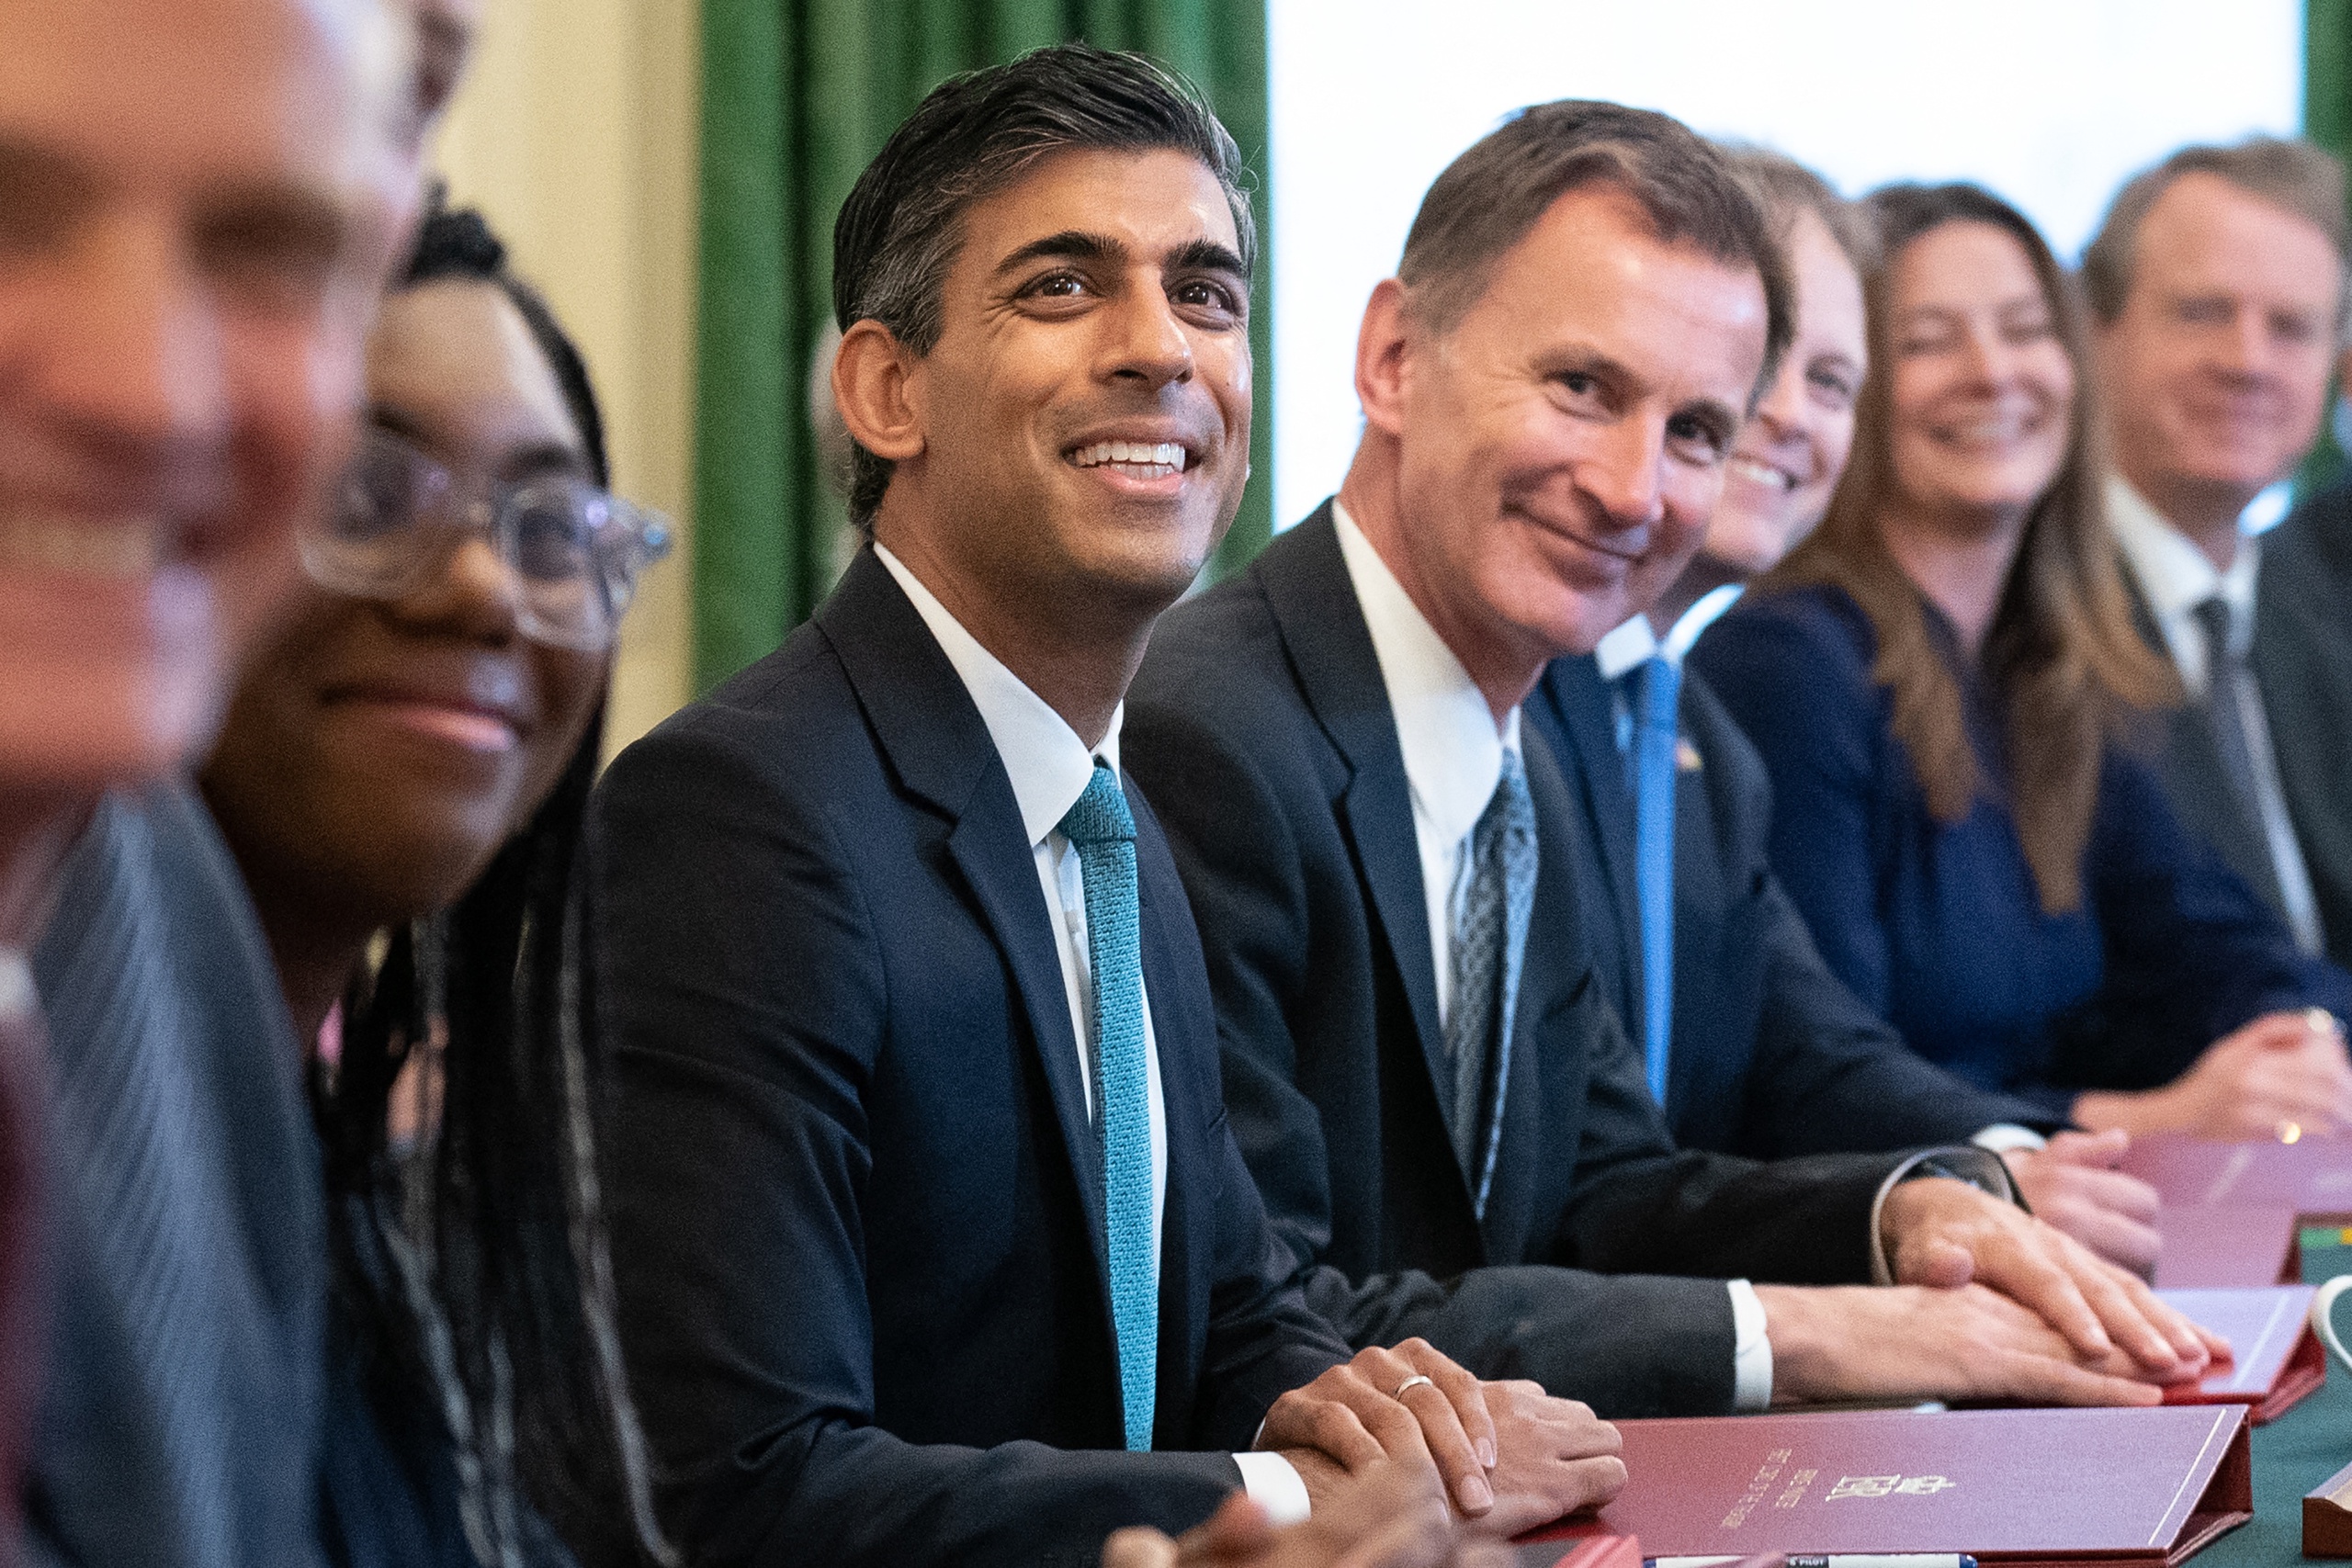 Britain's Prime Minister Rishi Sunak (C) poses for a photograph alongside Britain's Chancellor of the Exchequer Jeremy Hunt (centre right) and Britain's Secretary of State for International Trade, President of the Board of Trade and Minister for Women and Equalities Kemi Badenoch (centre left) at the first cabinet meeting under the new Prime Minister, Rishi Sunak in 10 Downing Street in central London on October 26, 2022. Sunak's largely same-look cabinet holds an inaugural meeting today before he heads to the House of Commons for his first weekly "Prime Minister's Questions", when he will battle Labour leader Keir Starmer and other opposition lawmakers. Stefan Rousseau / POOL / AFP